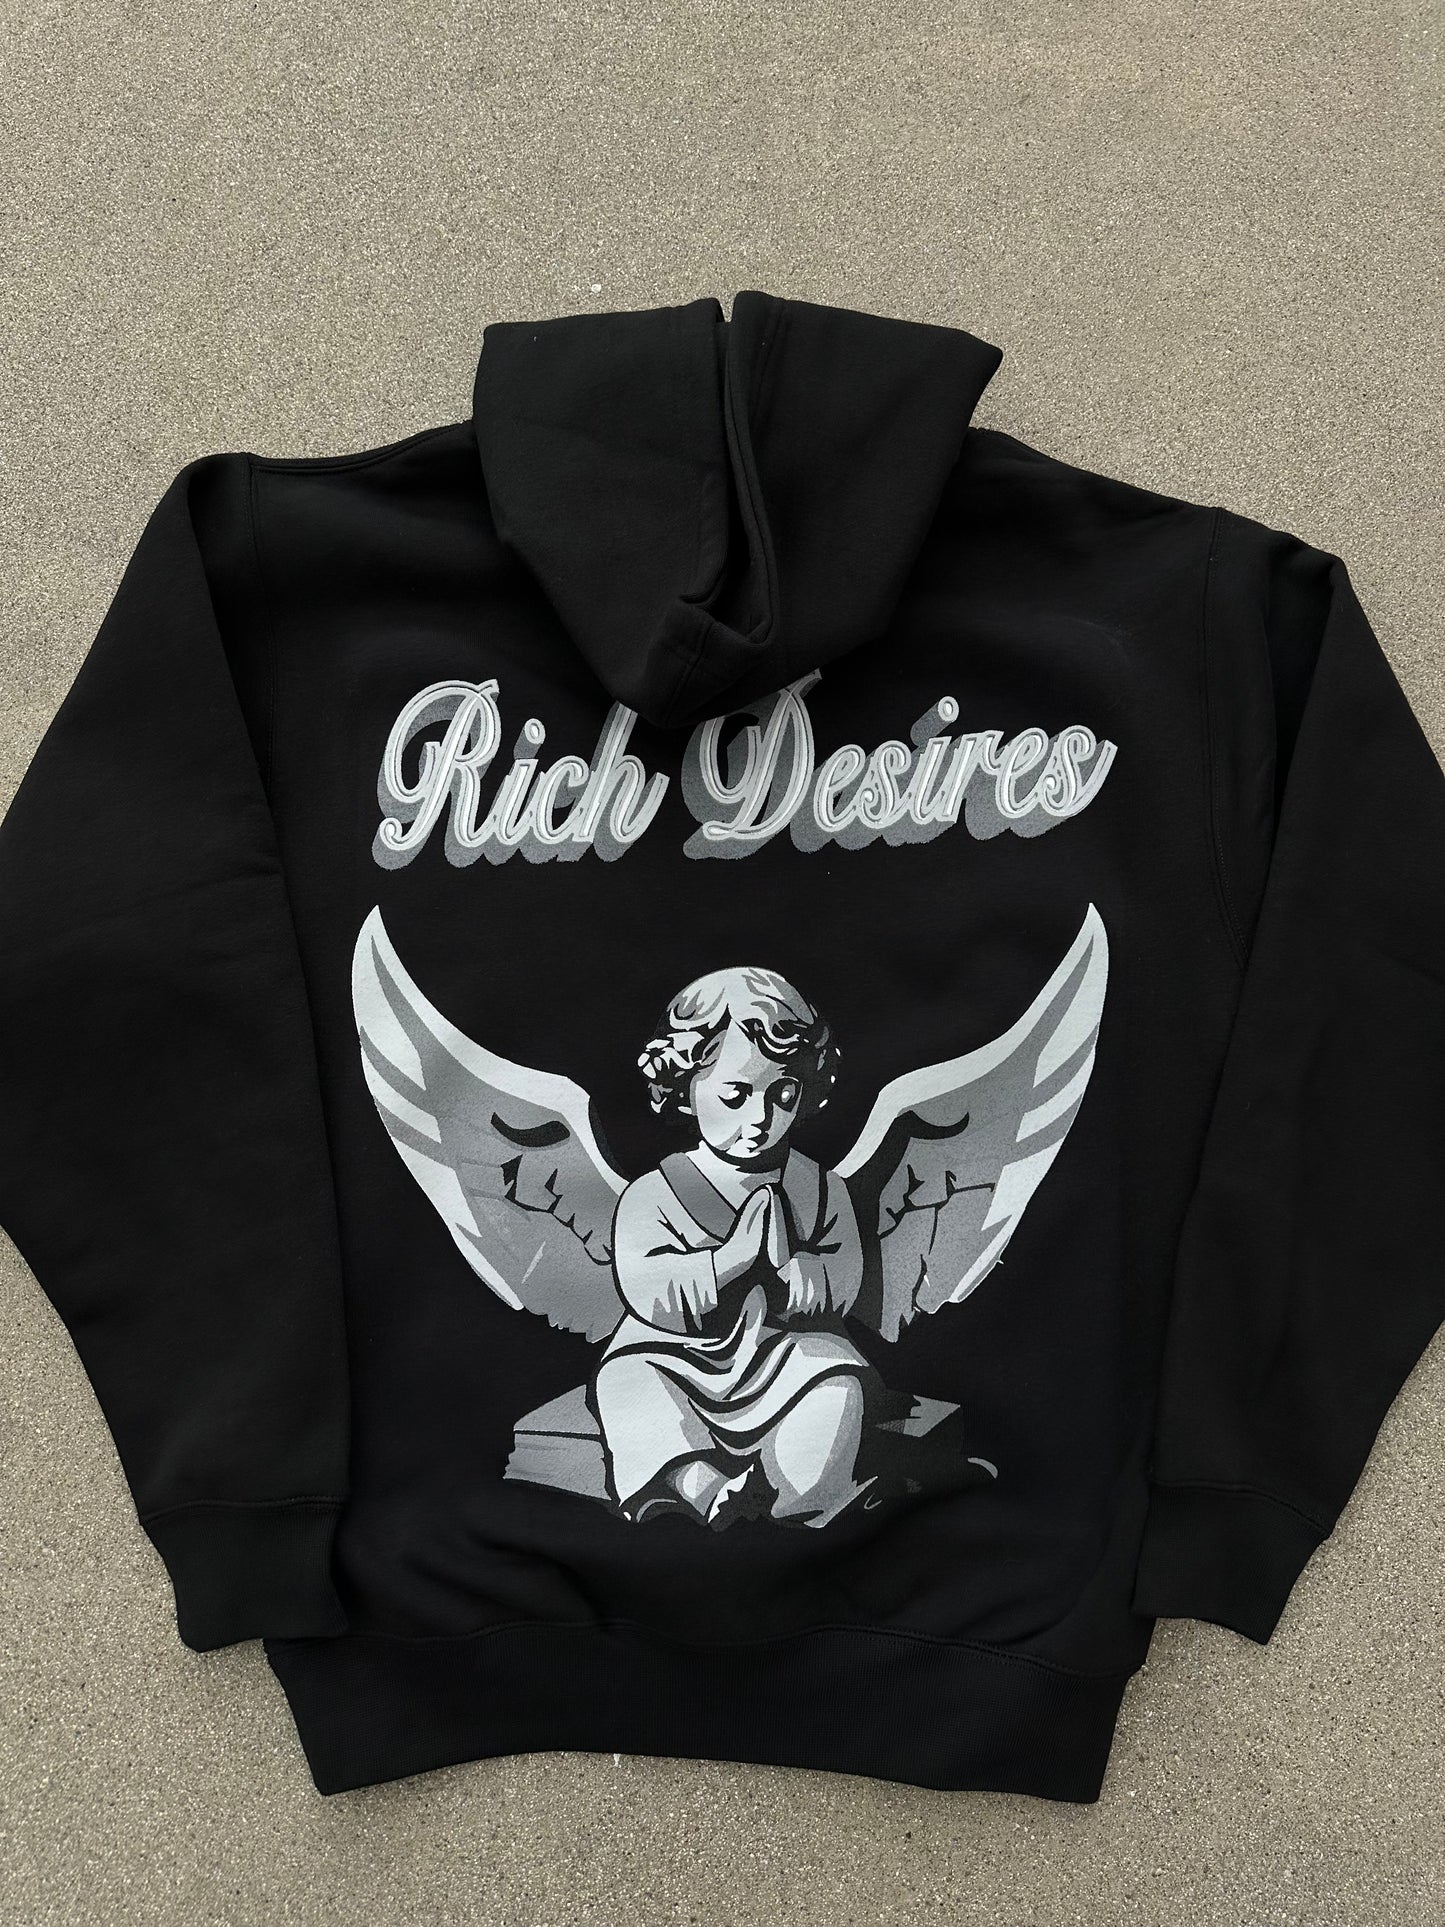 RICH DESIRES EMBROIDED CROSS SWEATER